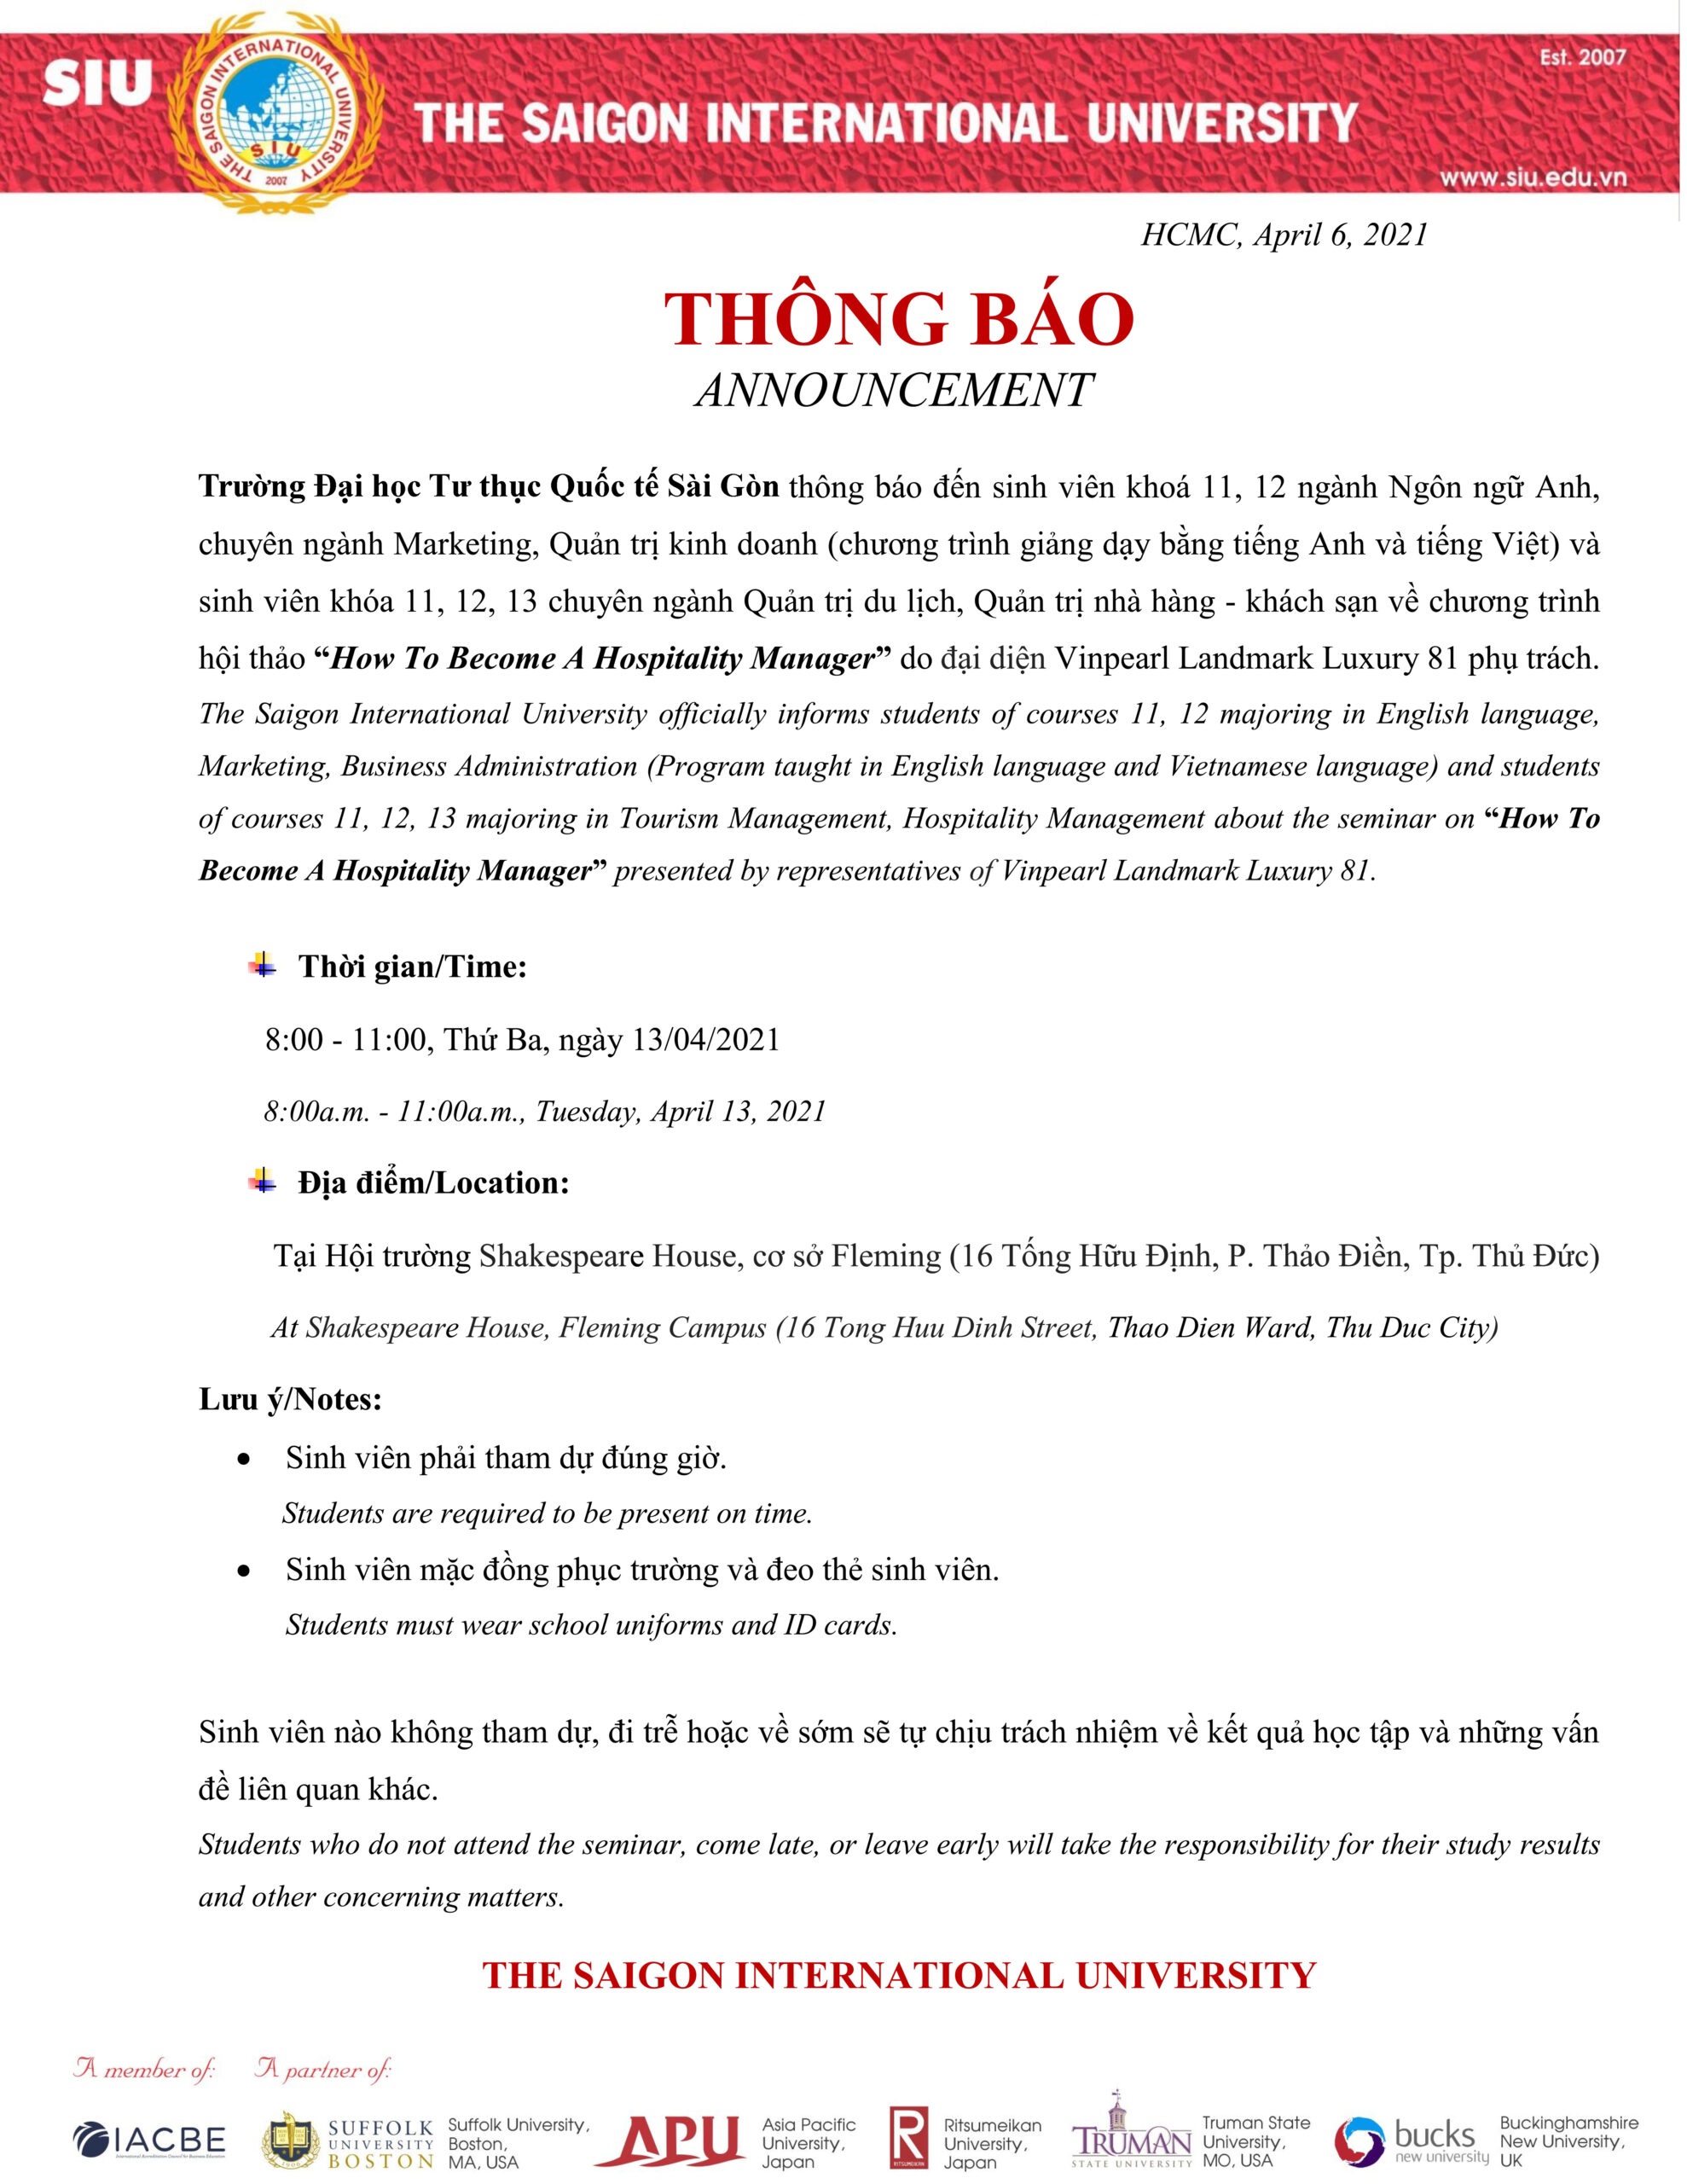 Hội thảo “How To Become A Hospitality Manager”